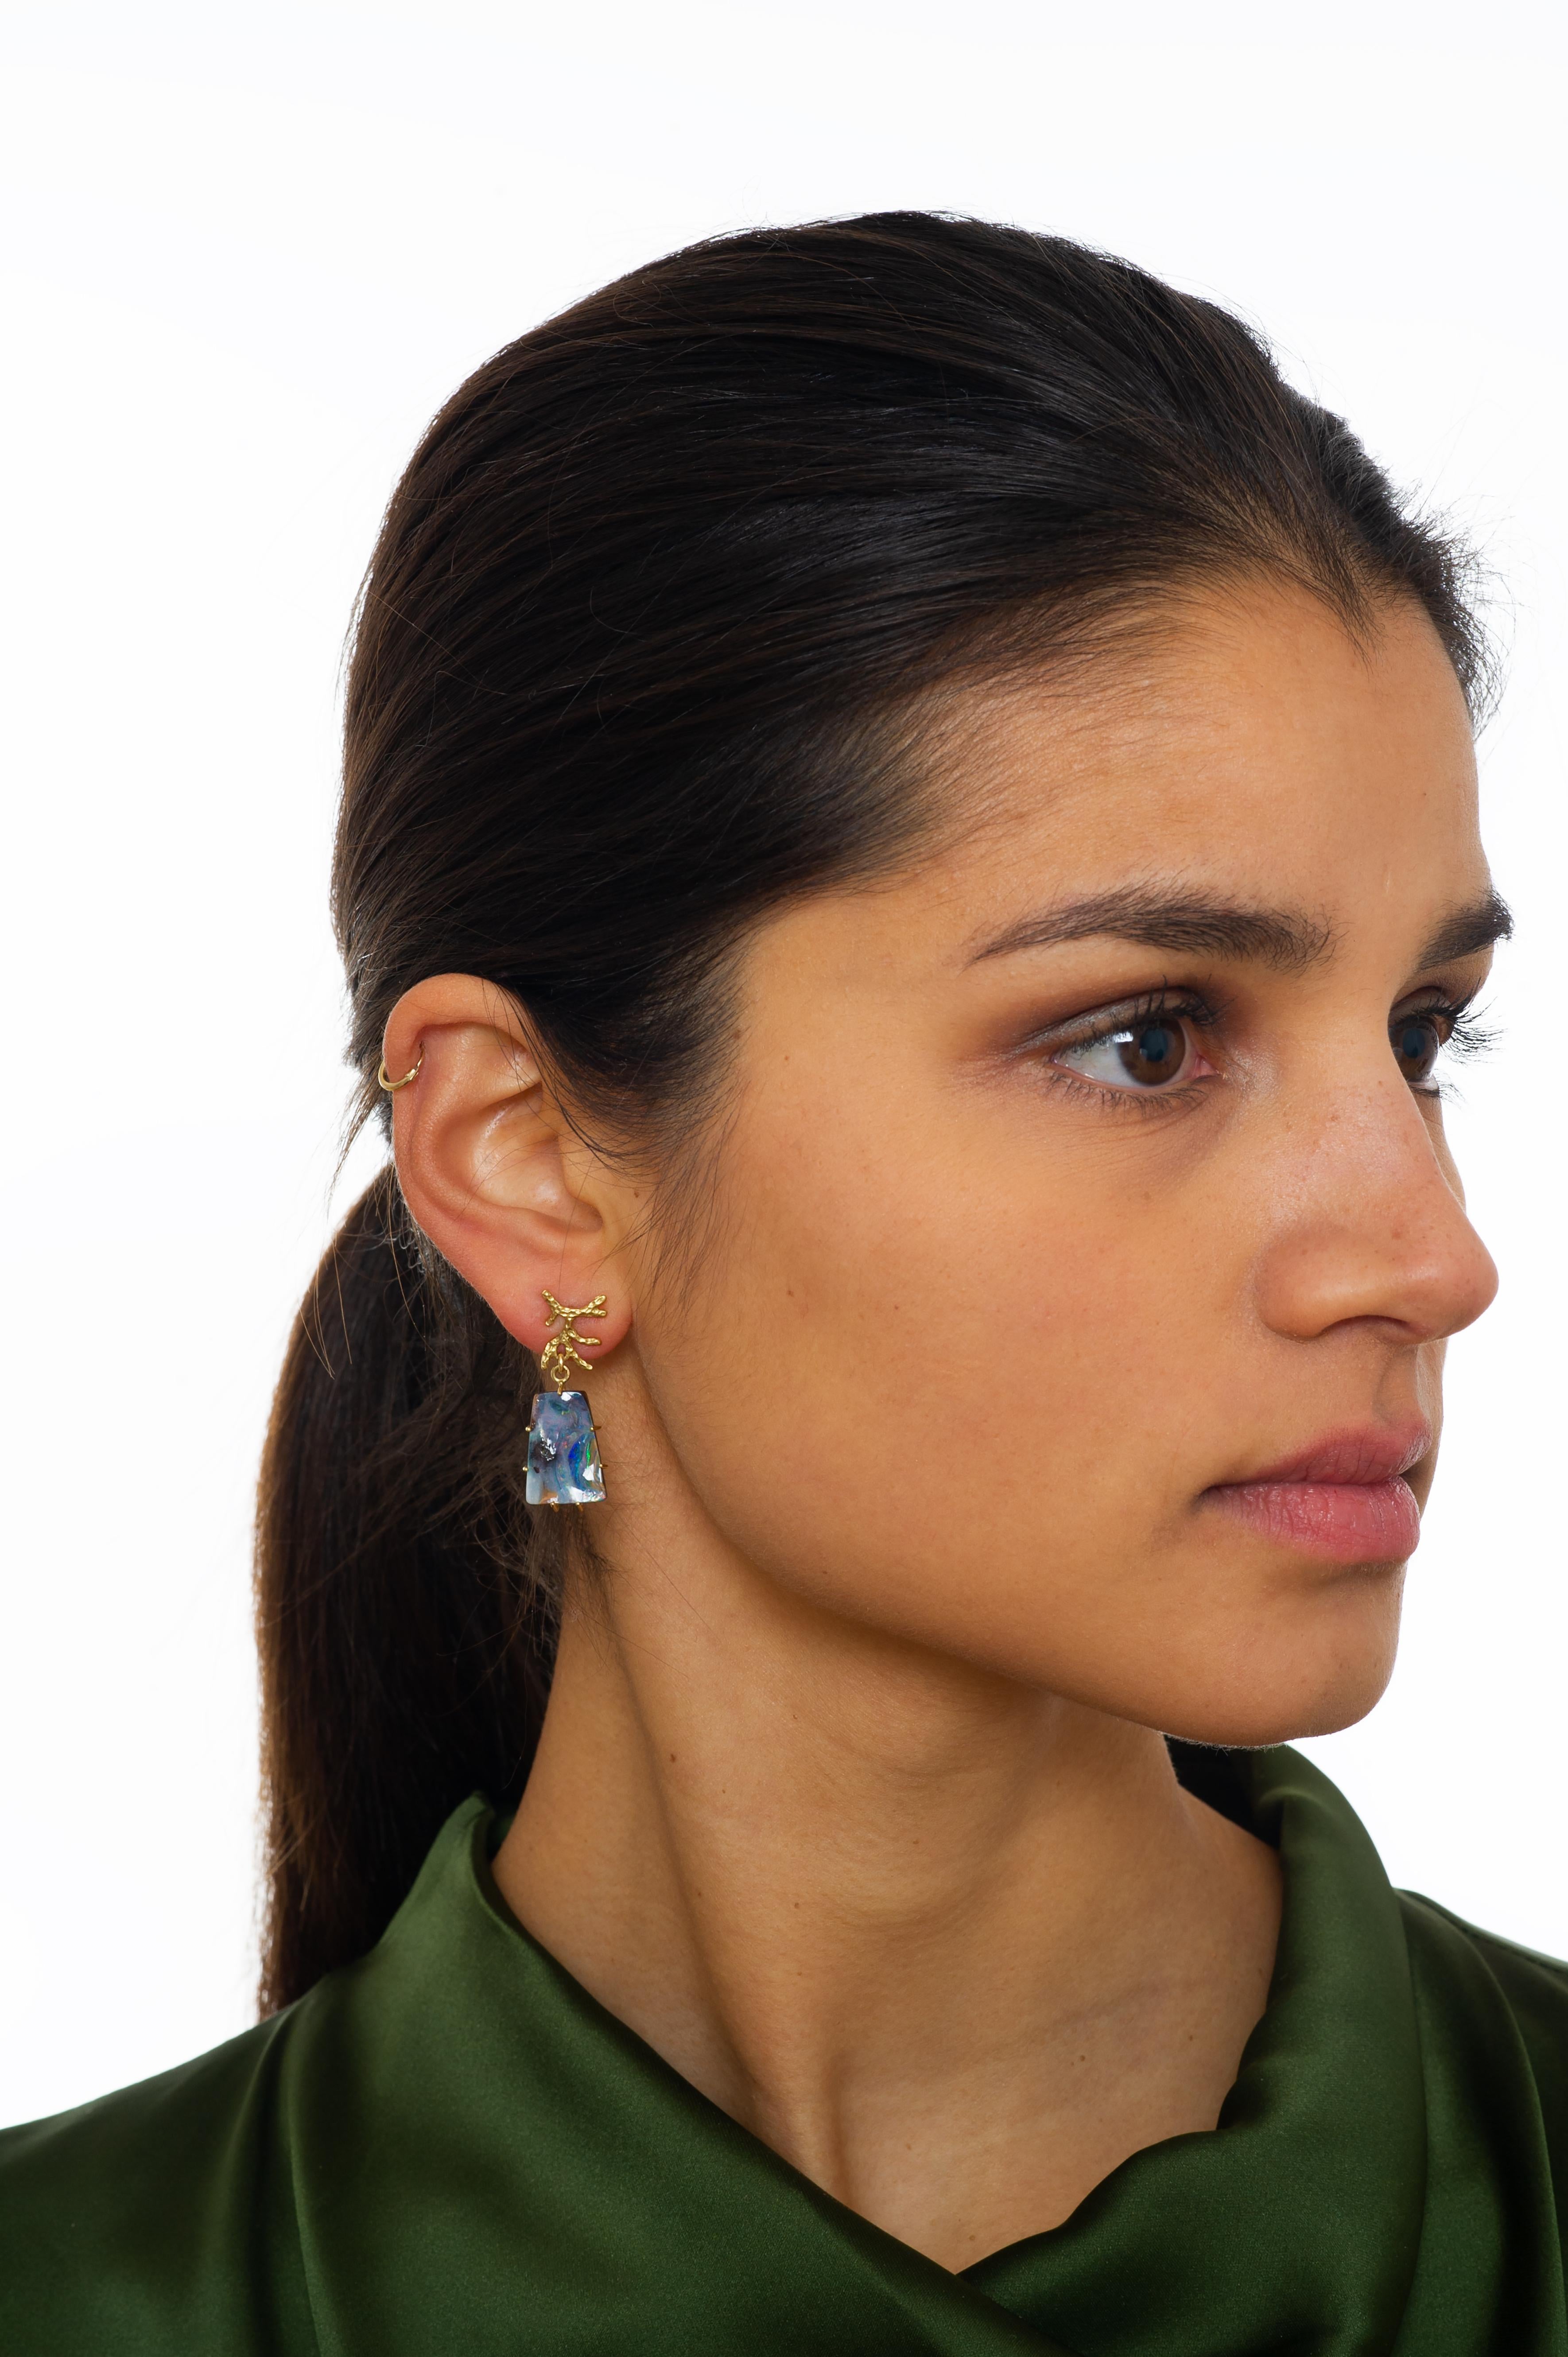 Artisan Handcrafted One-of-a-kind 18kt Gold and Precious Black Boulder Opal Earrings For Sale